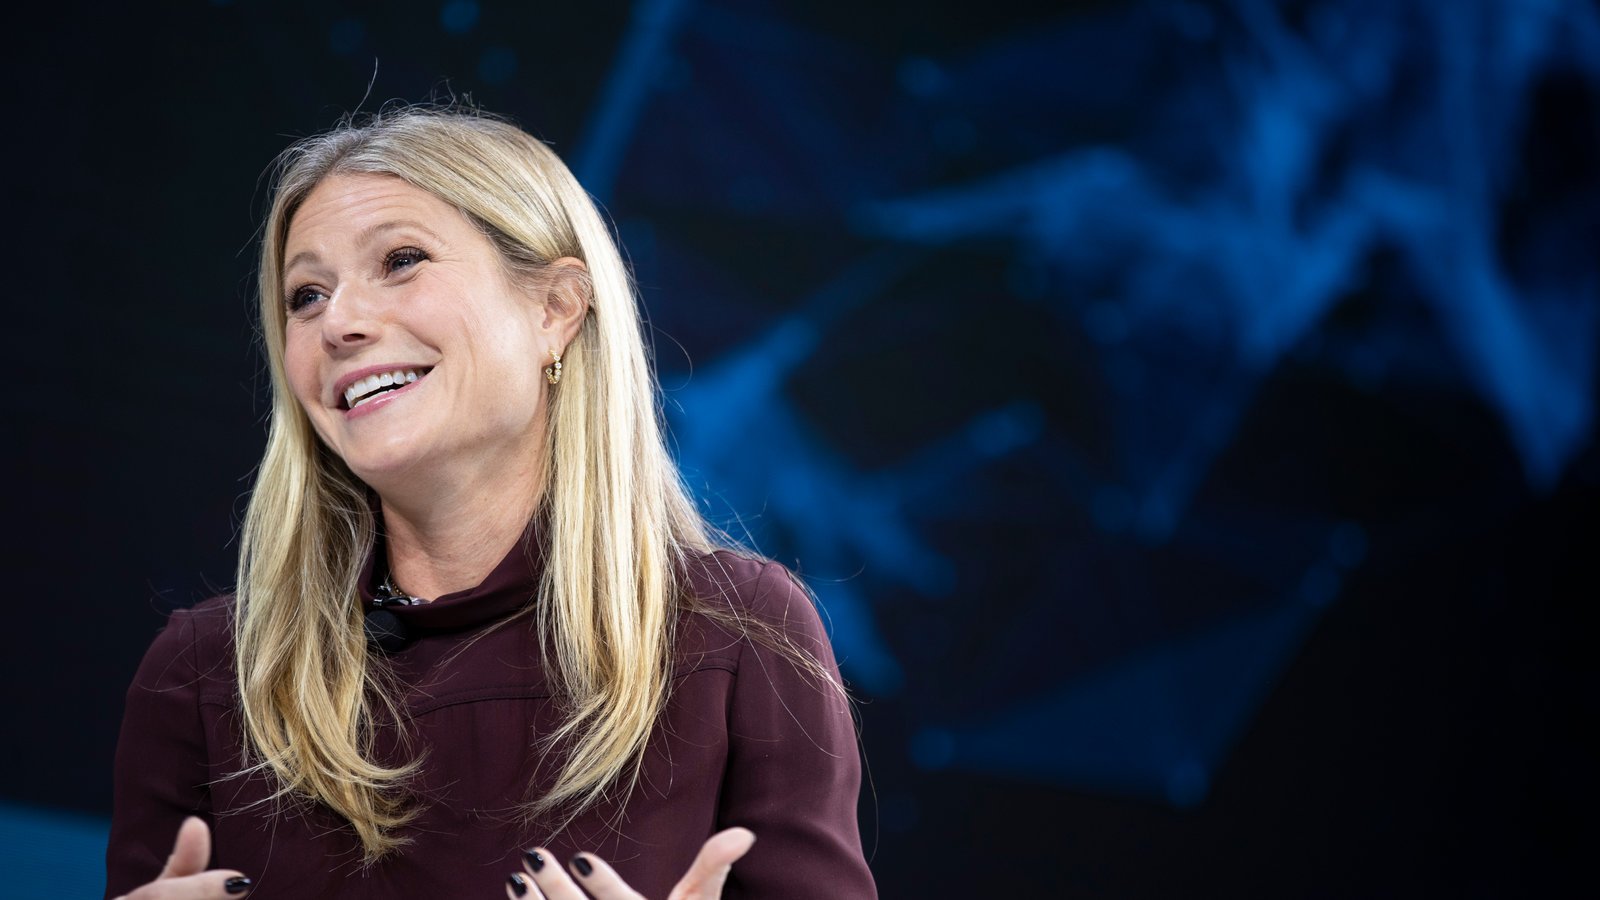 Gwyneth Paltrow on Goop and Beyond: 'It's a Process'